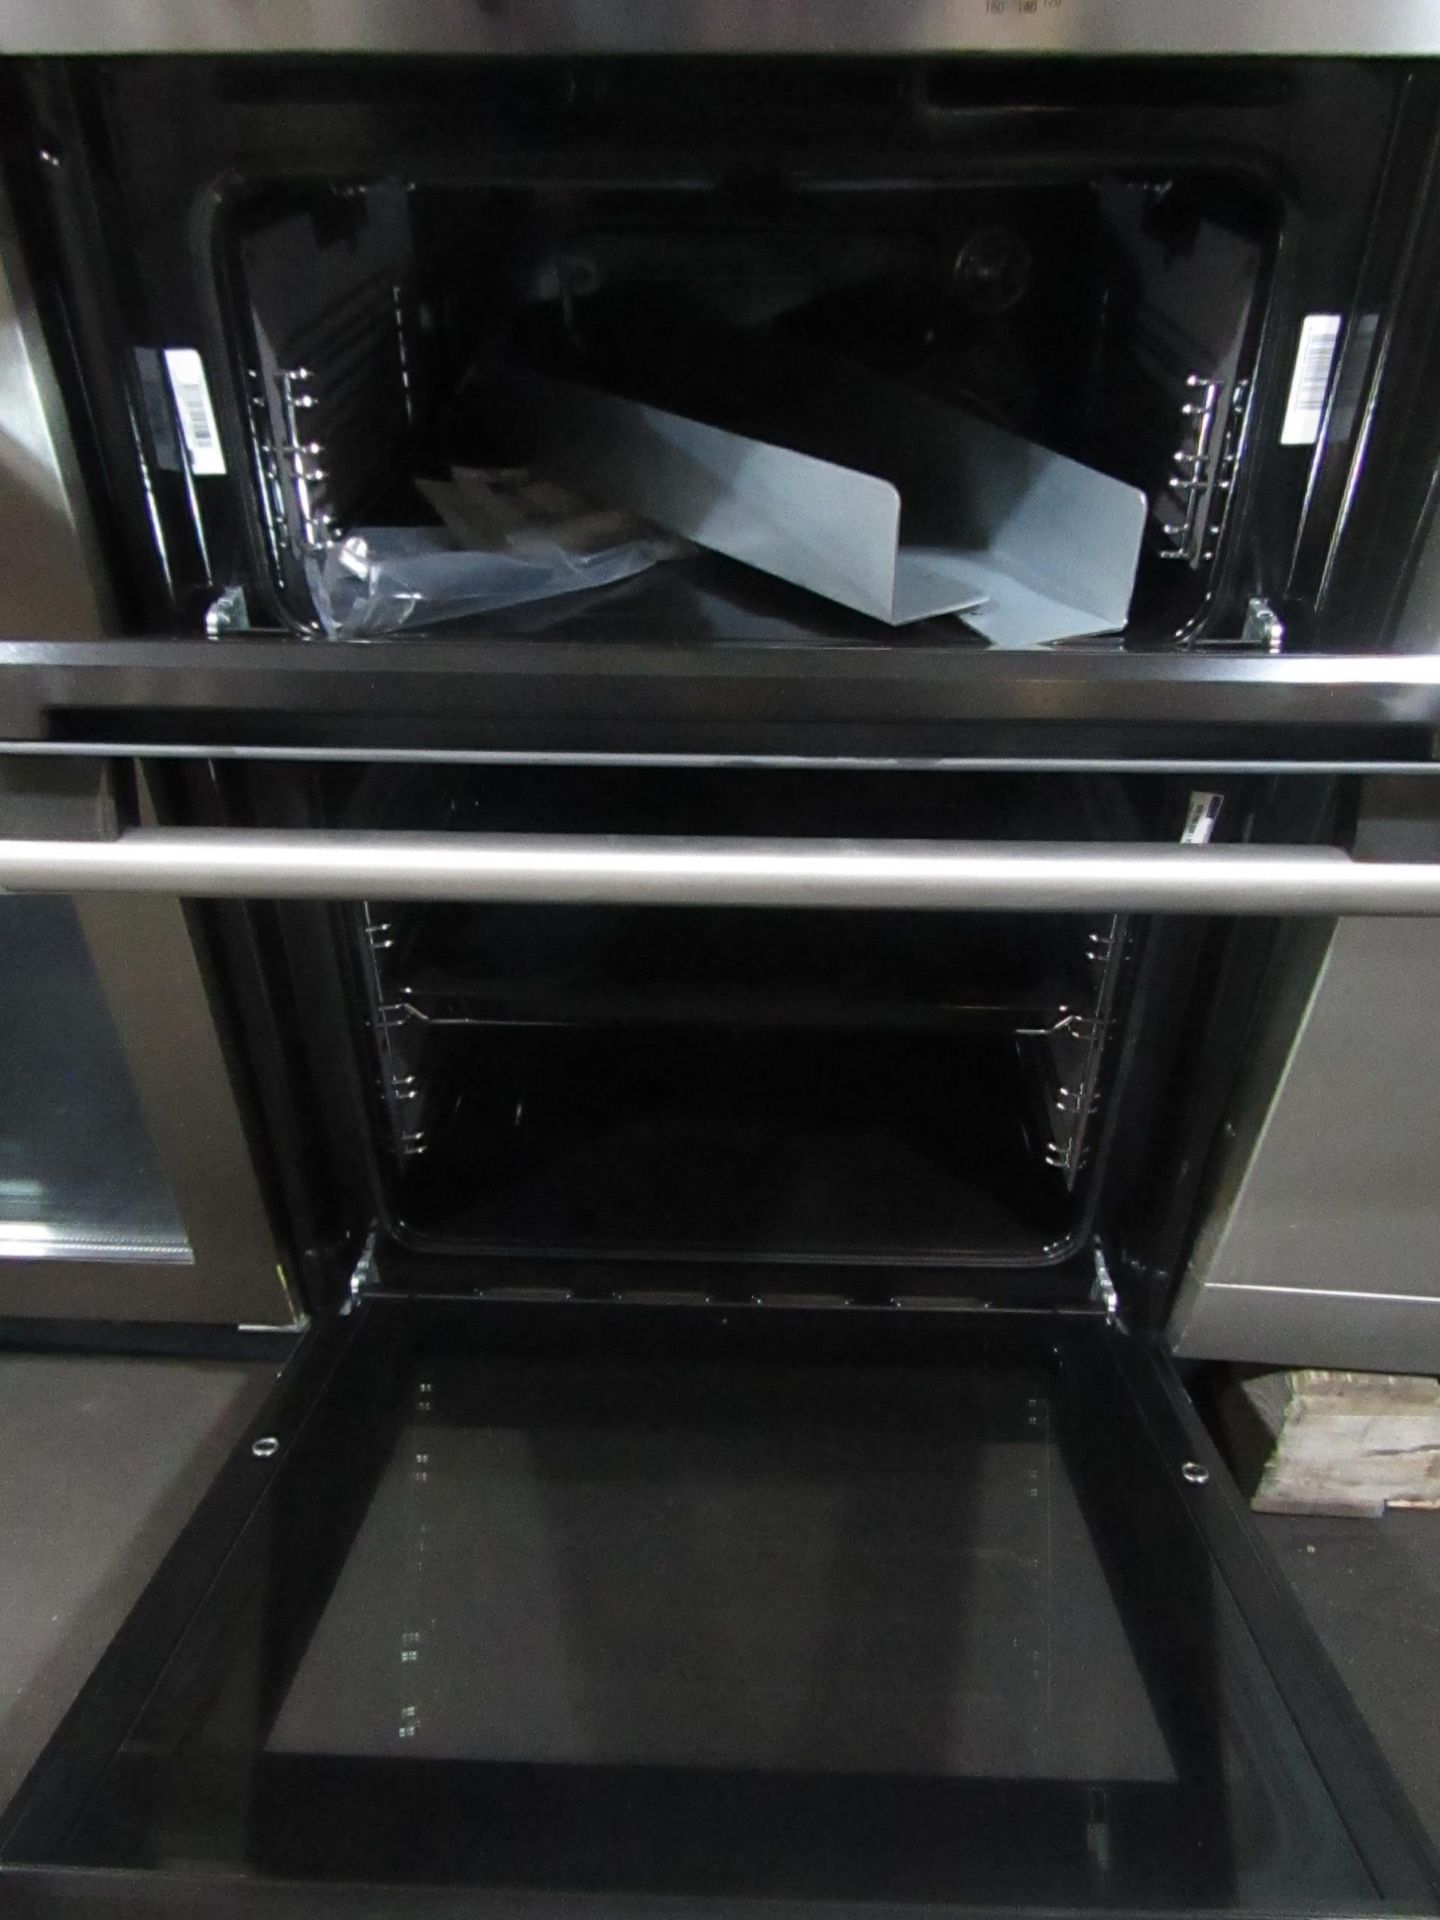 1 x Hotpoint Double Oven model no. DD2544CIX_SS RRP ??359.00 SKU AO-APM-2370697-BER-DOA TOTAL - Image 2 of 2